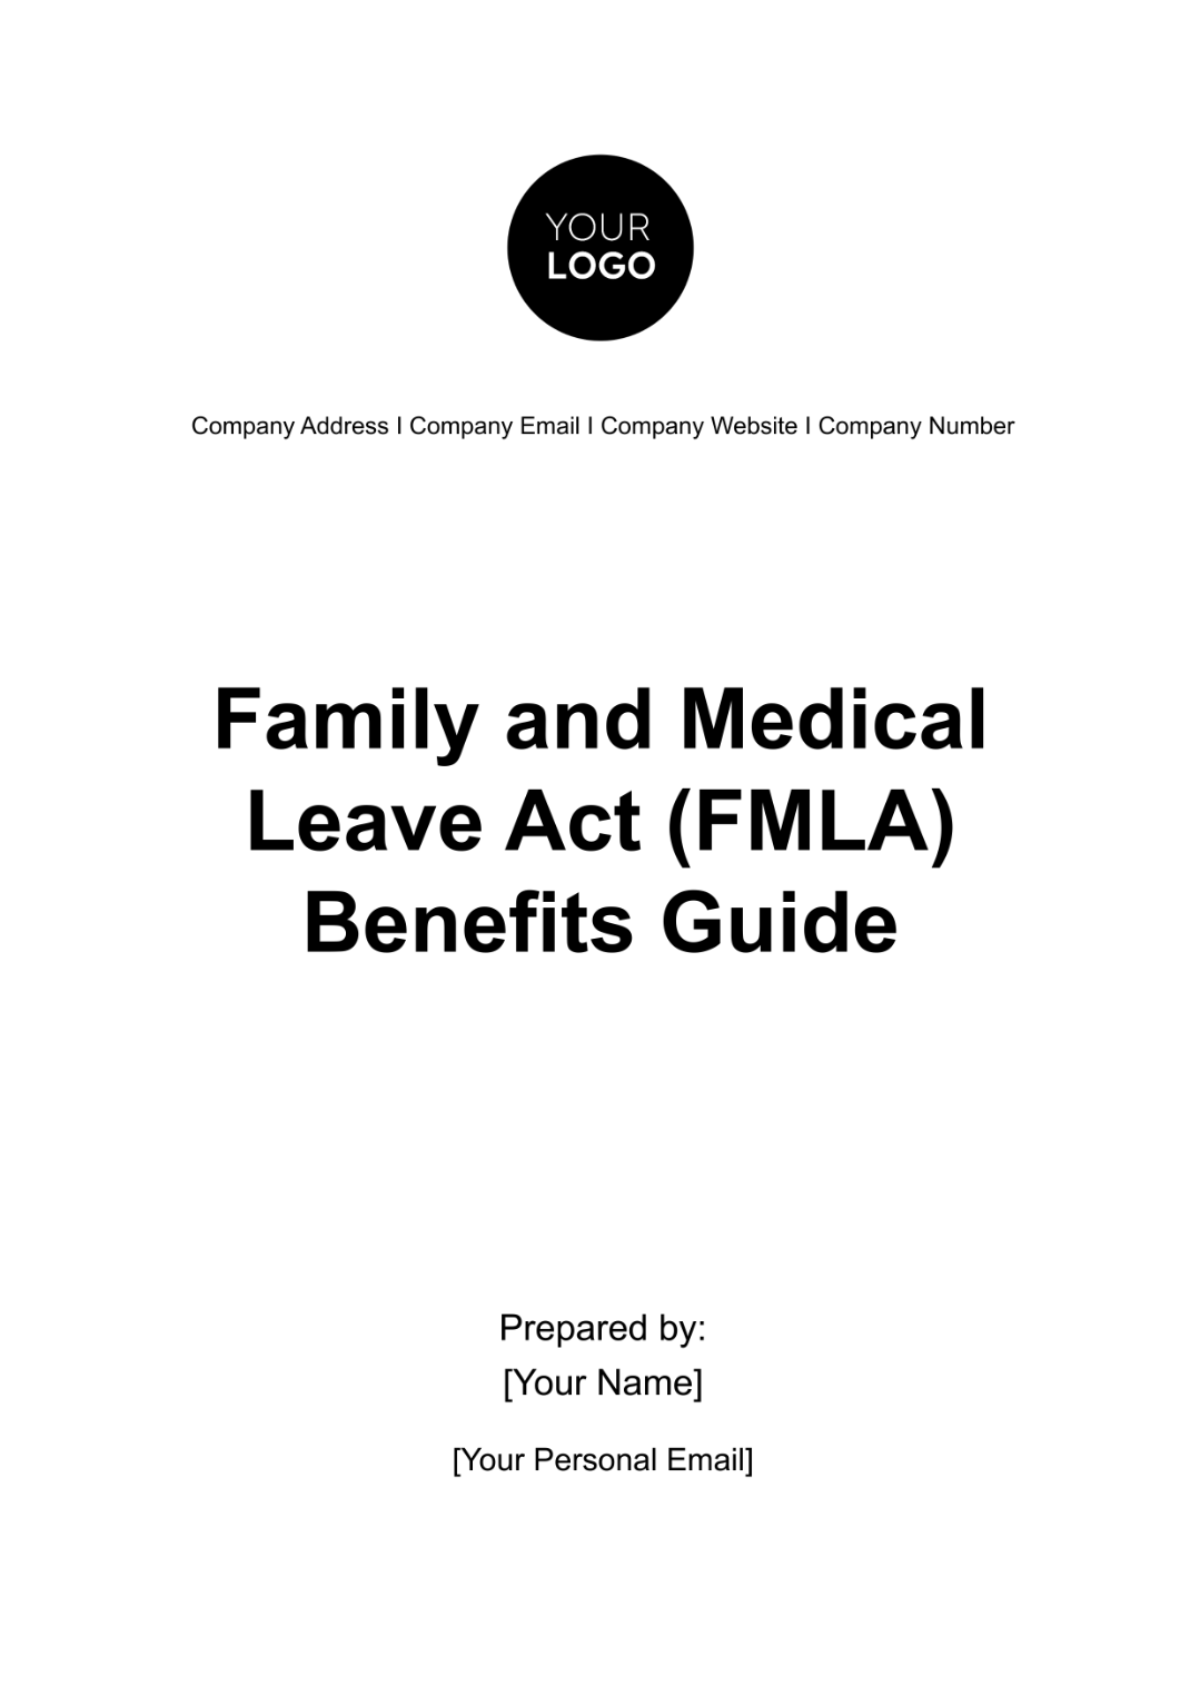 Free Family and Medical Leave Act (FMLA) Benefits Guide HR Template